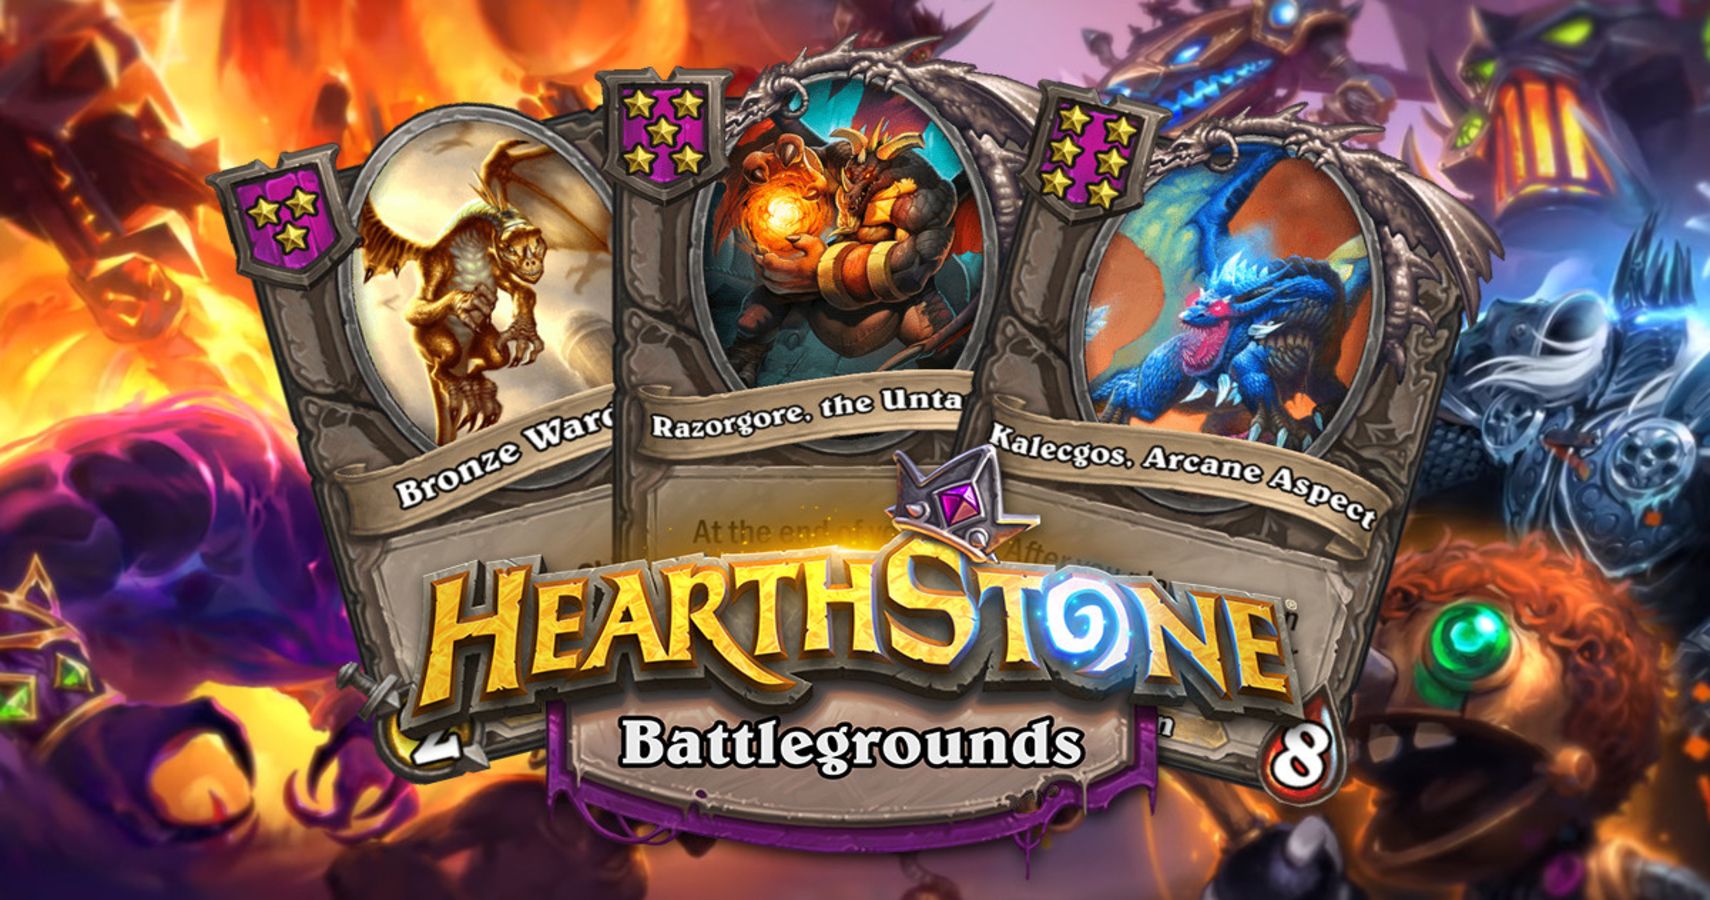 hearthstone images